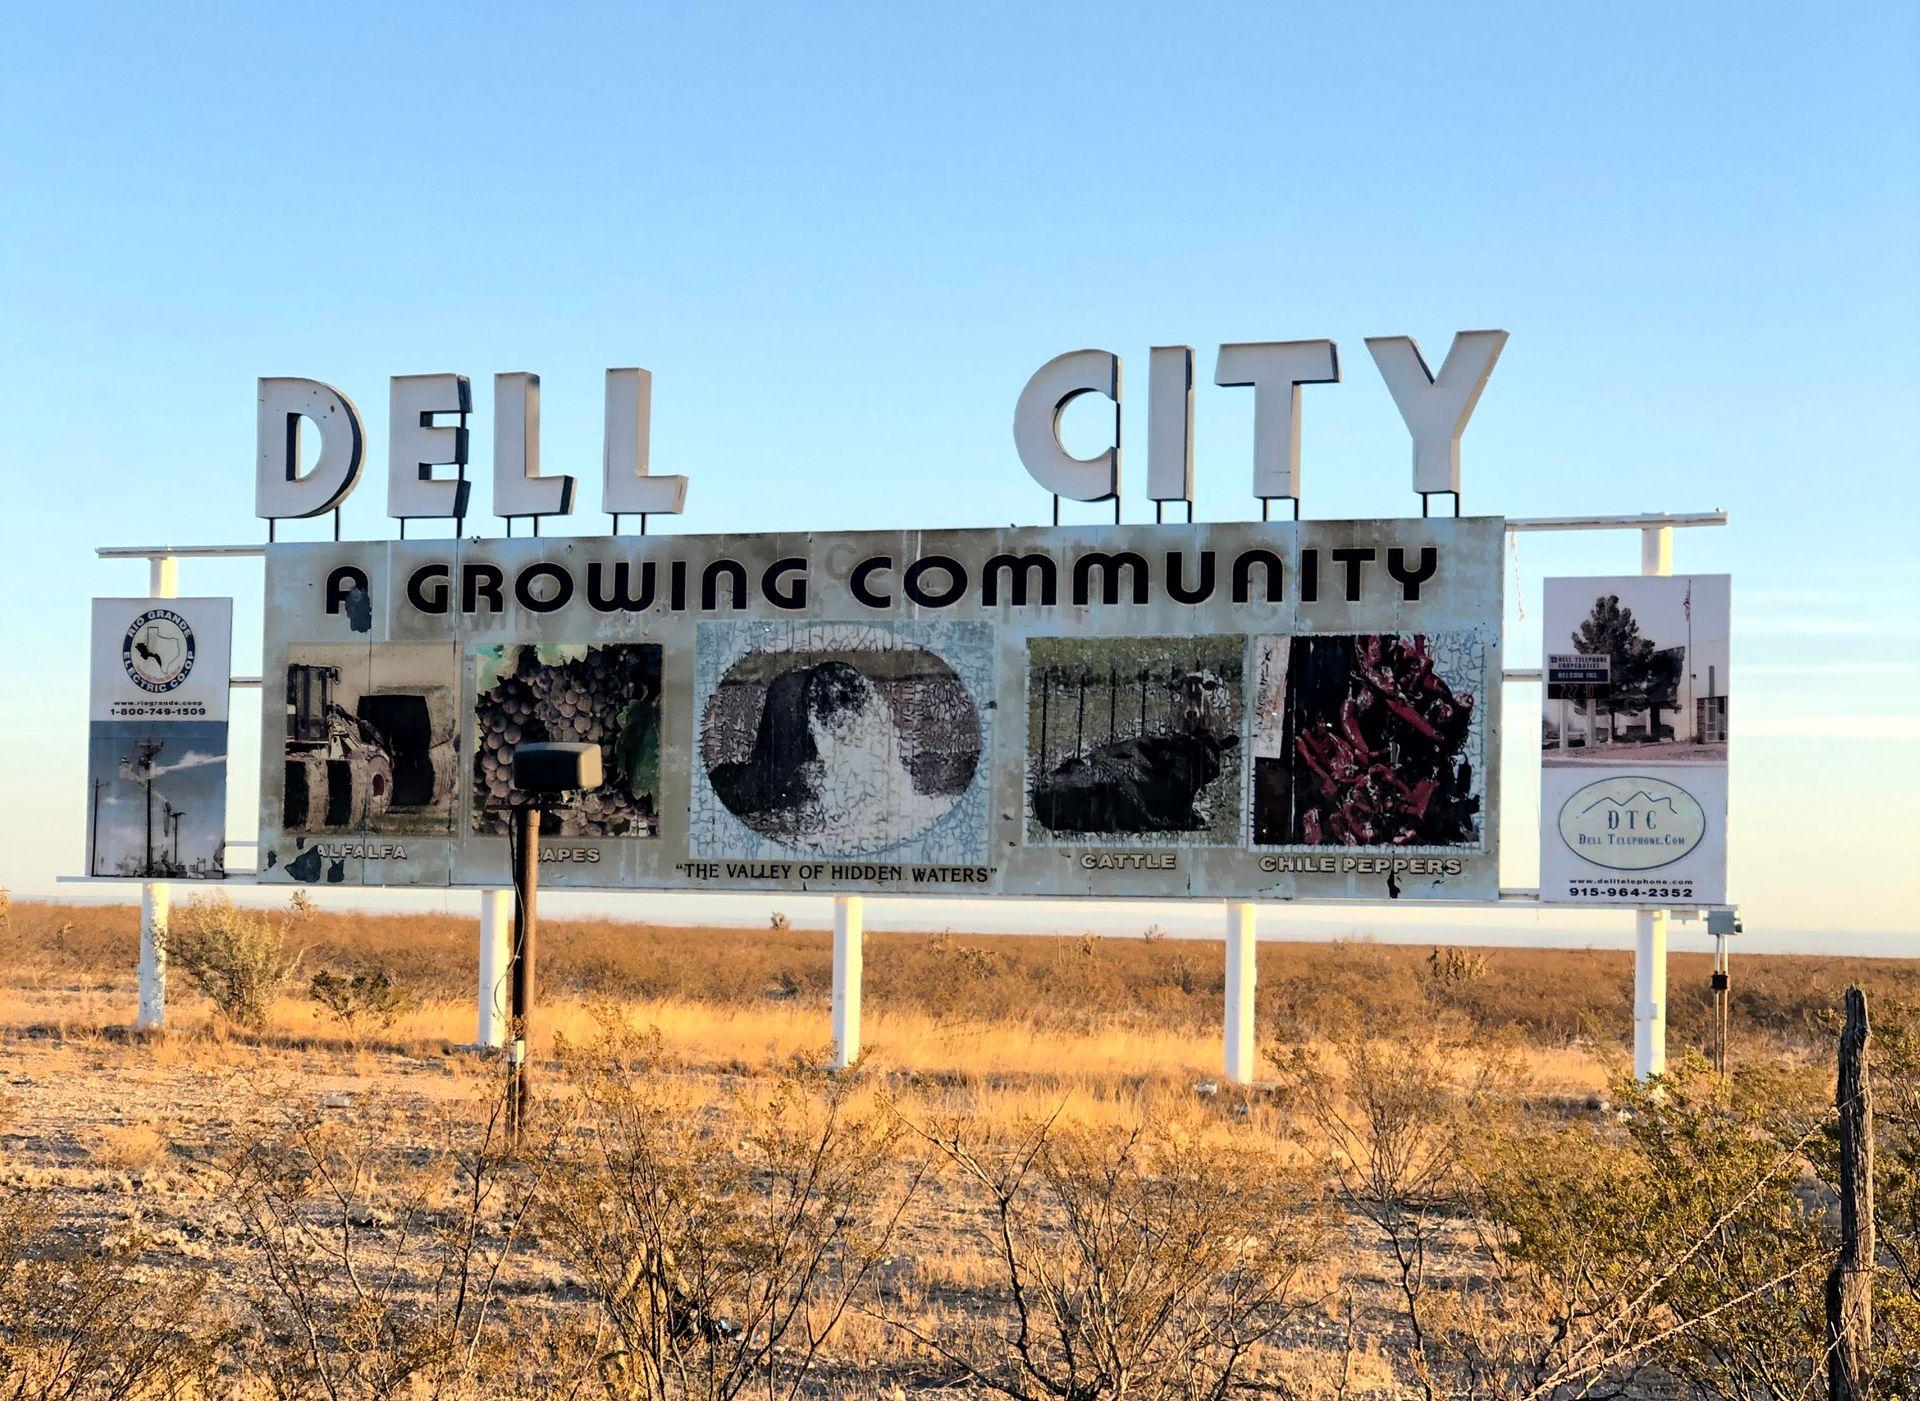 The sign outside of the town of Dell City. It reads "Dell City, A Growing Community" and there are images of chile peppers, cattle and a valley of hidden waters